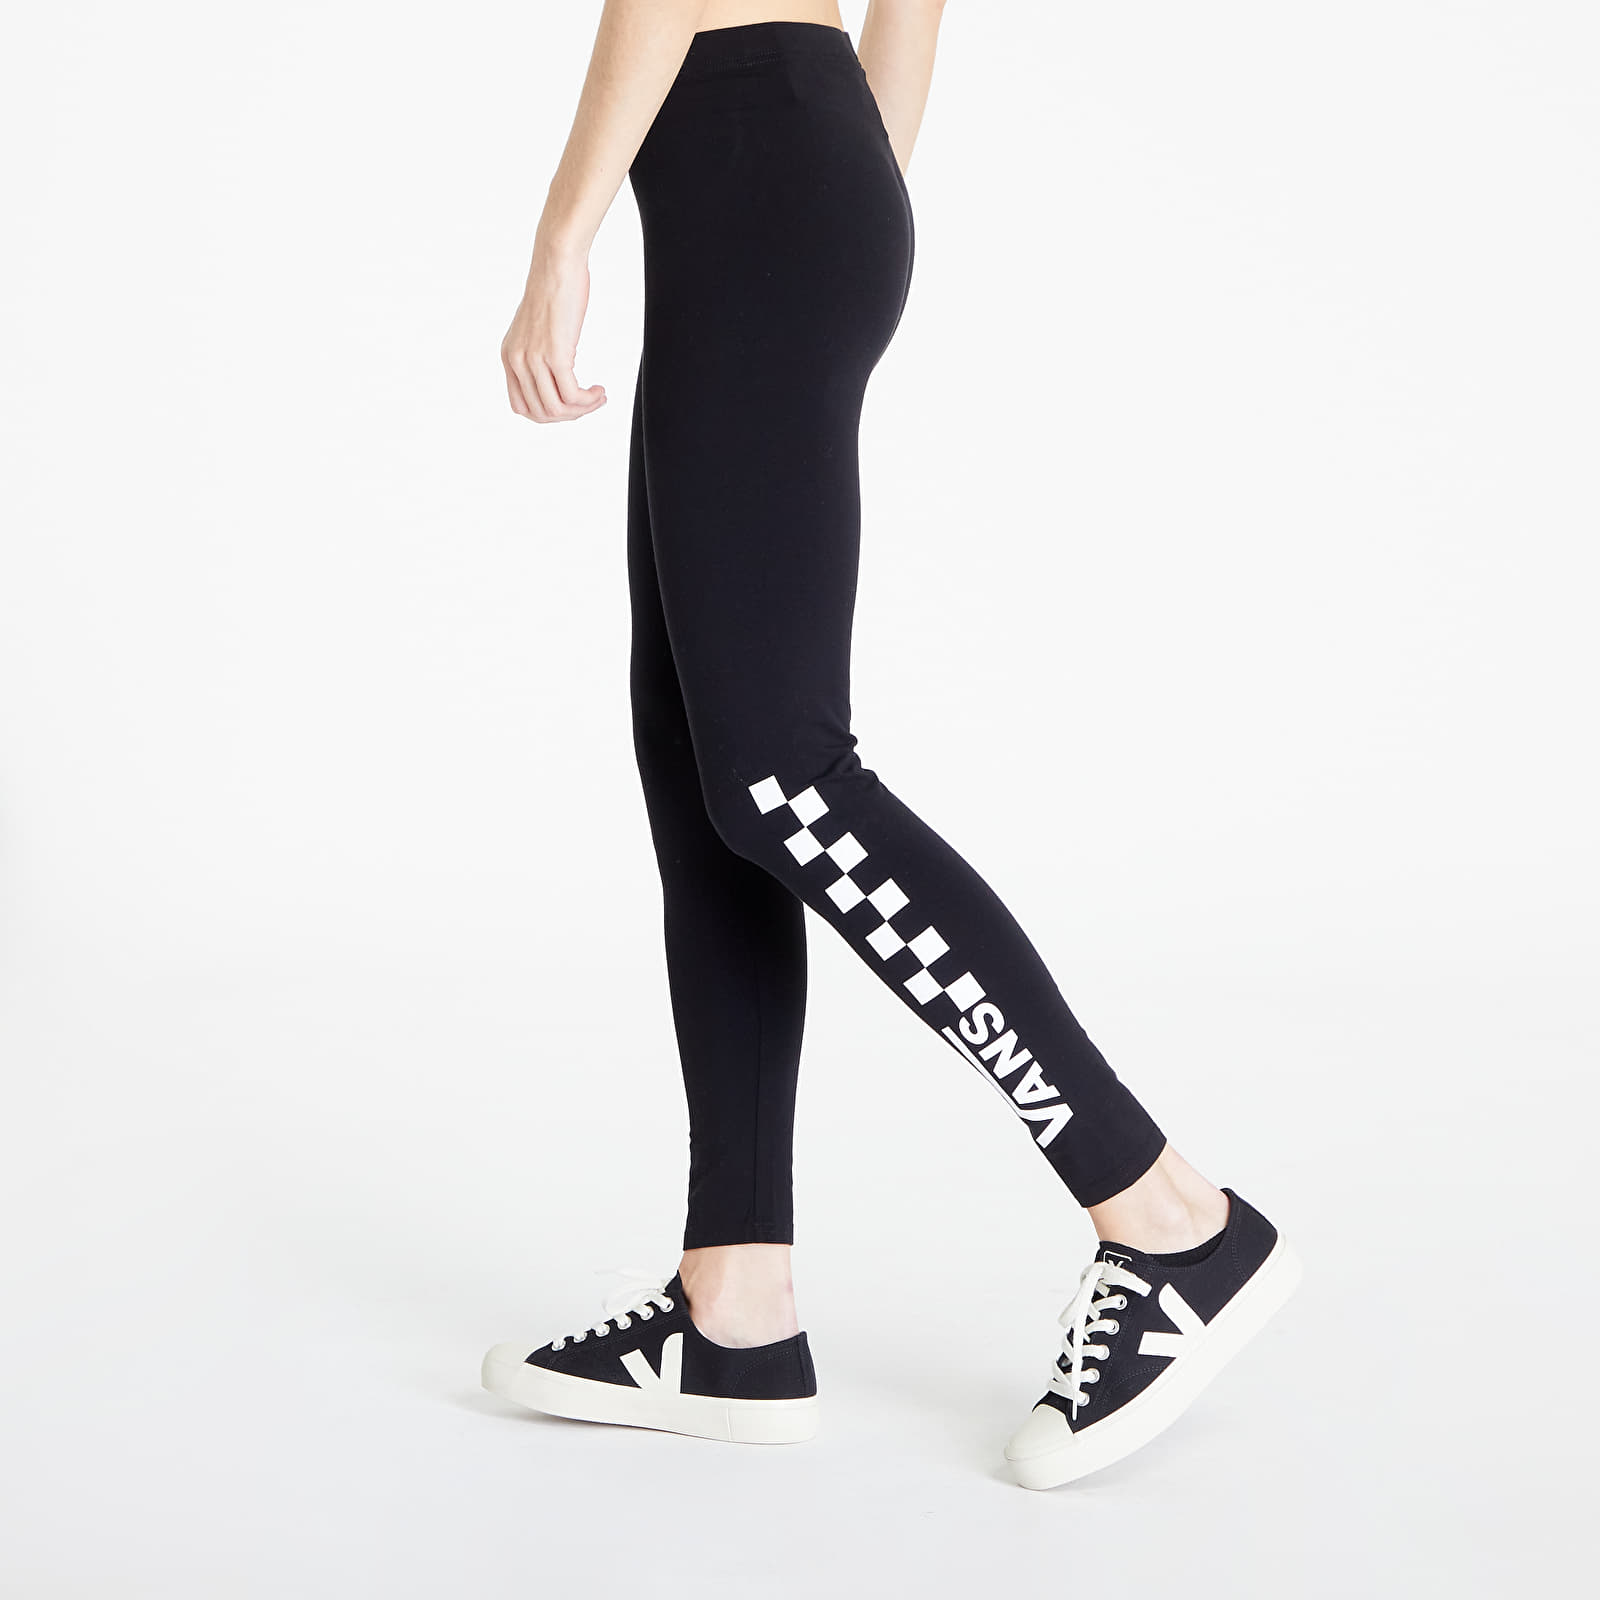 Vans and flared leggings: January fashion is skyrocketing! – The Hilltopper